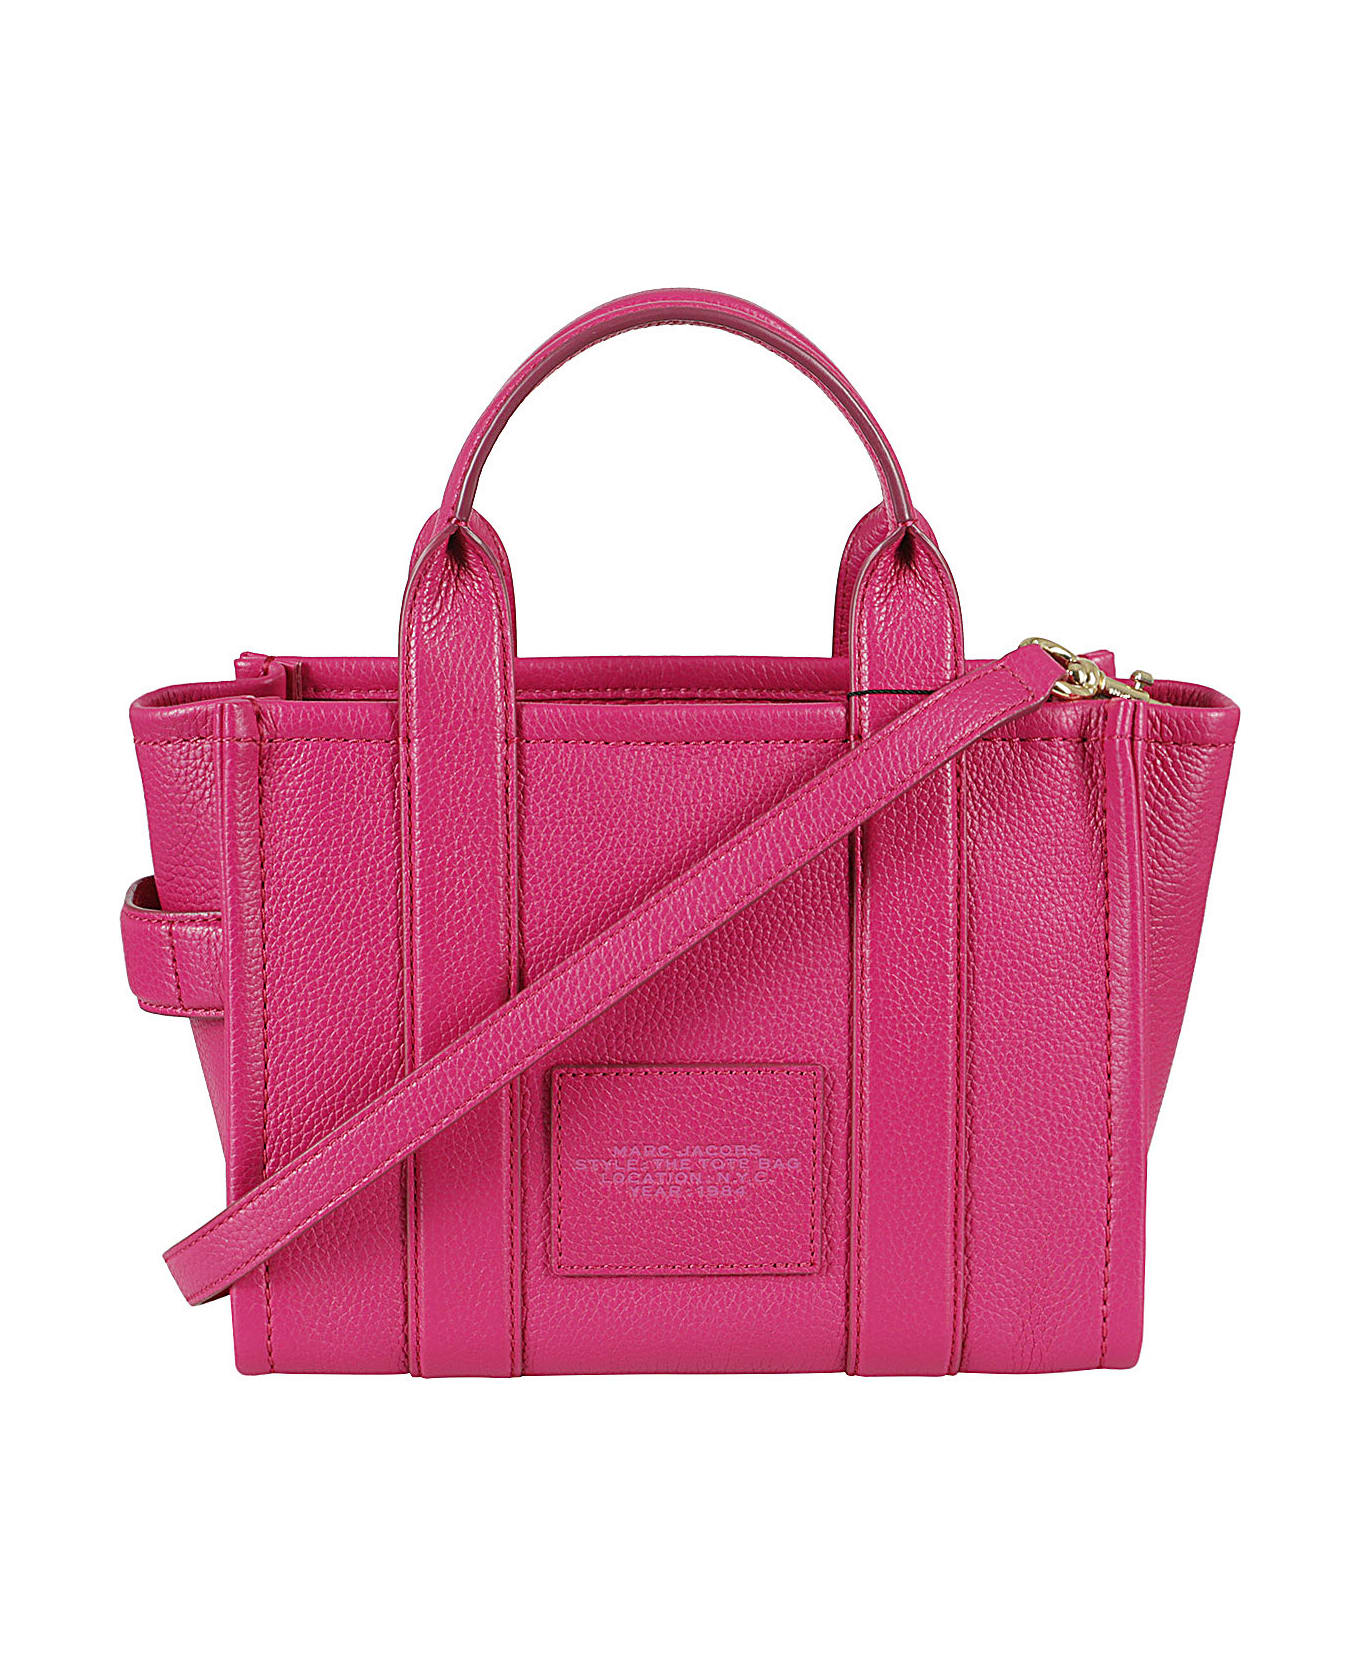 Marc Jacobs The Small Tote - Lipstick Pink トートバッグ